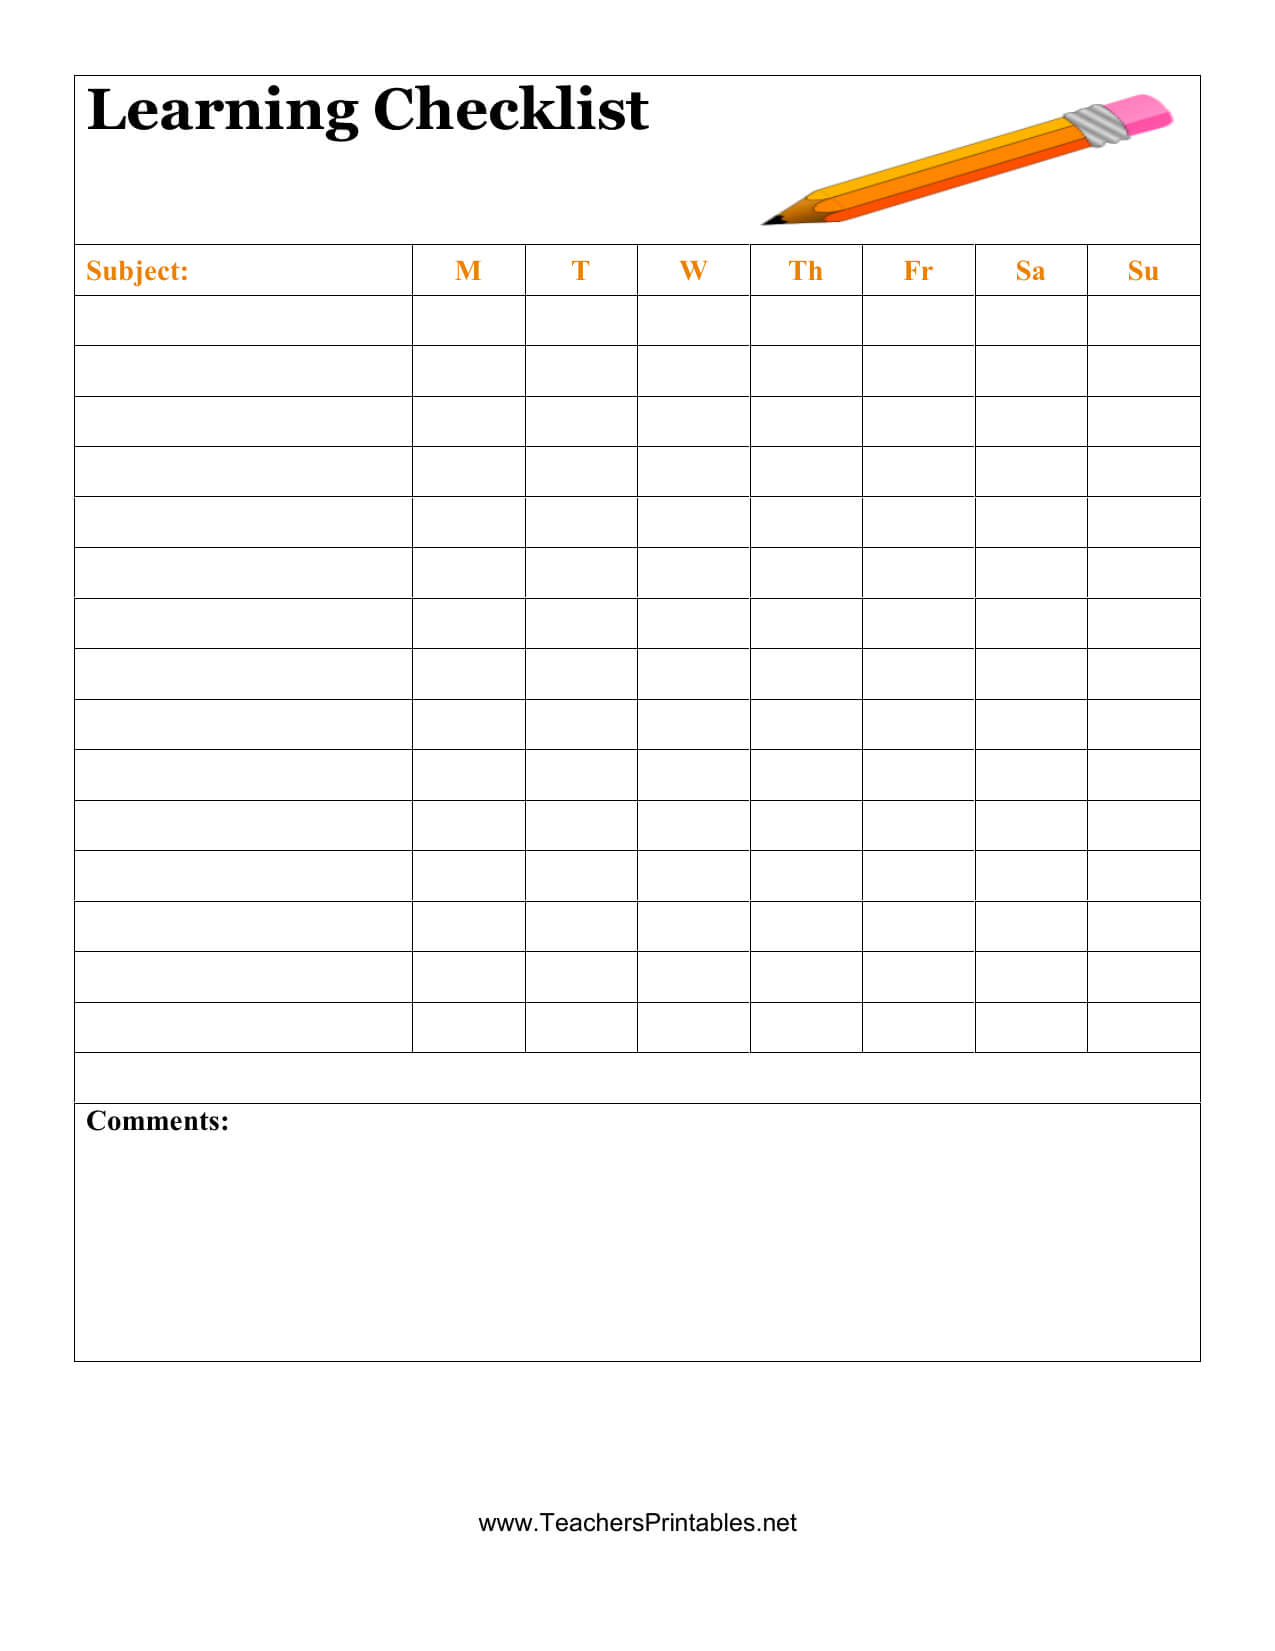 Download Student Checklist Template | Excel | Pdf | Rtf Pertaining To Blank Checklist Template Pdf